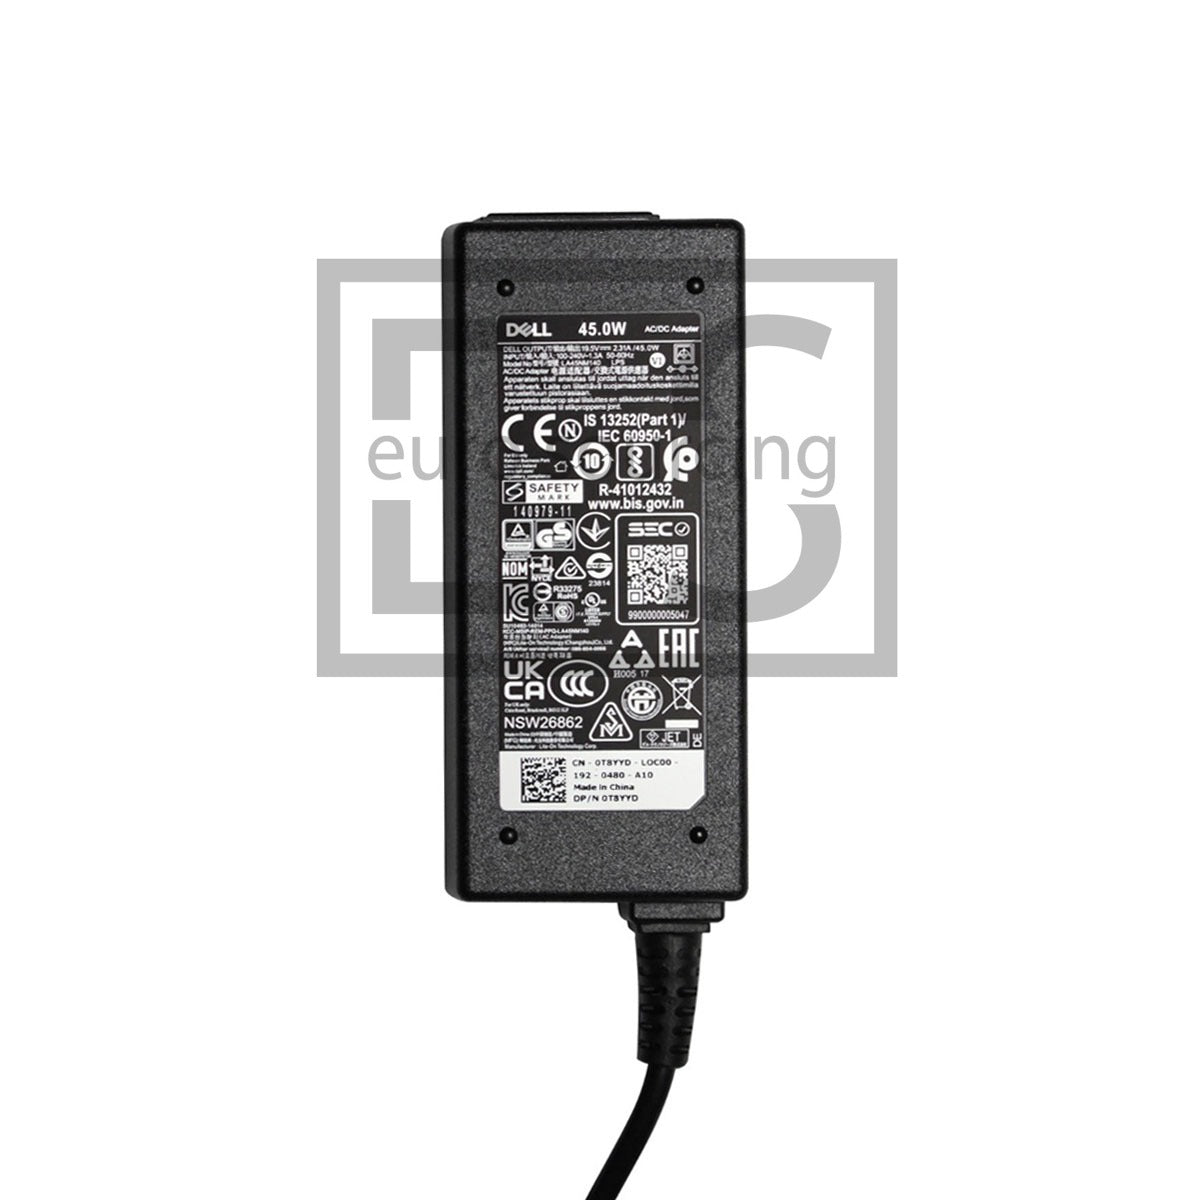 Genuine DELL 19.5V 2.31A DELC231 *ROUND* TYPE DELL BRAND 45W AC ADAPTER 4.5MM x 3.0MM Compatible With DELL XPS 13 SERIES